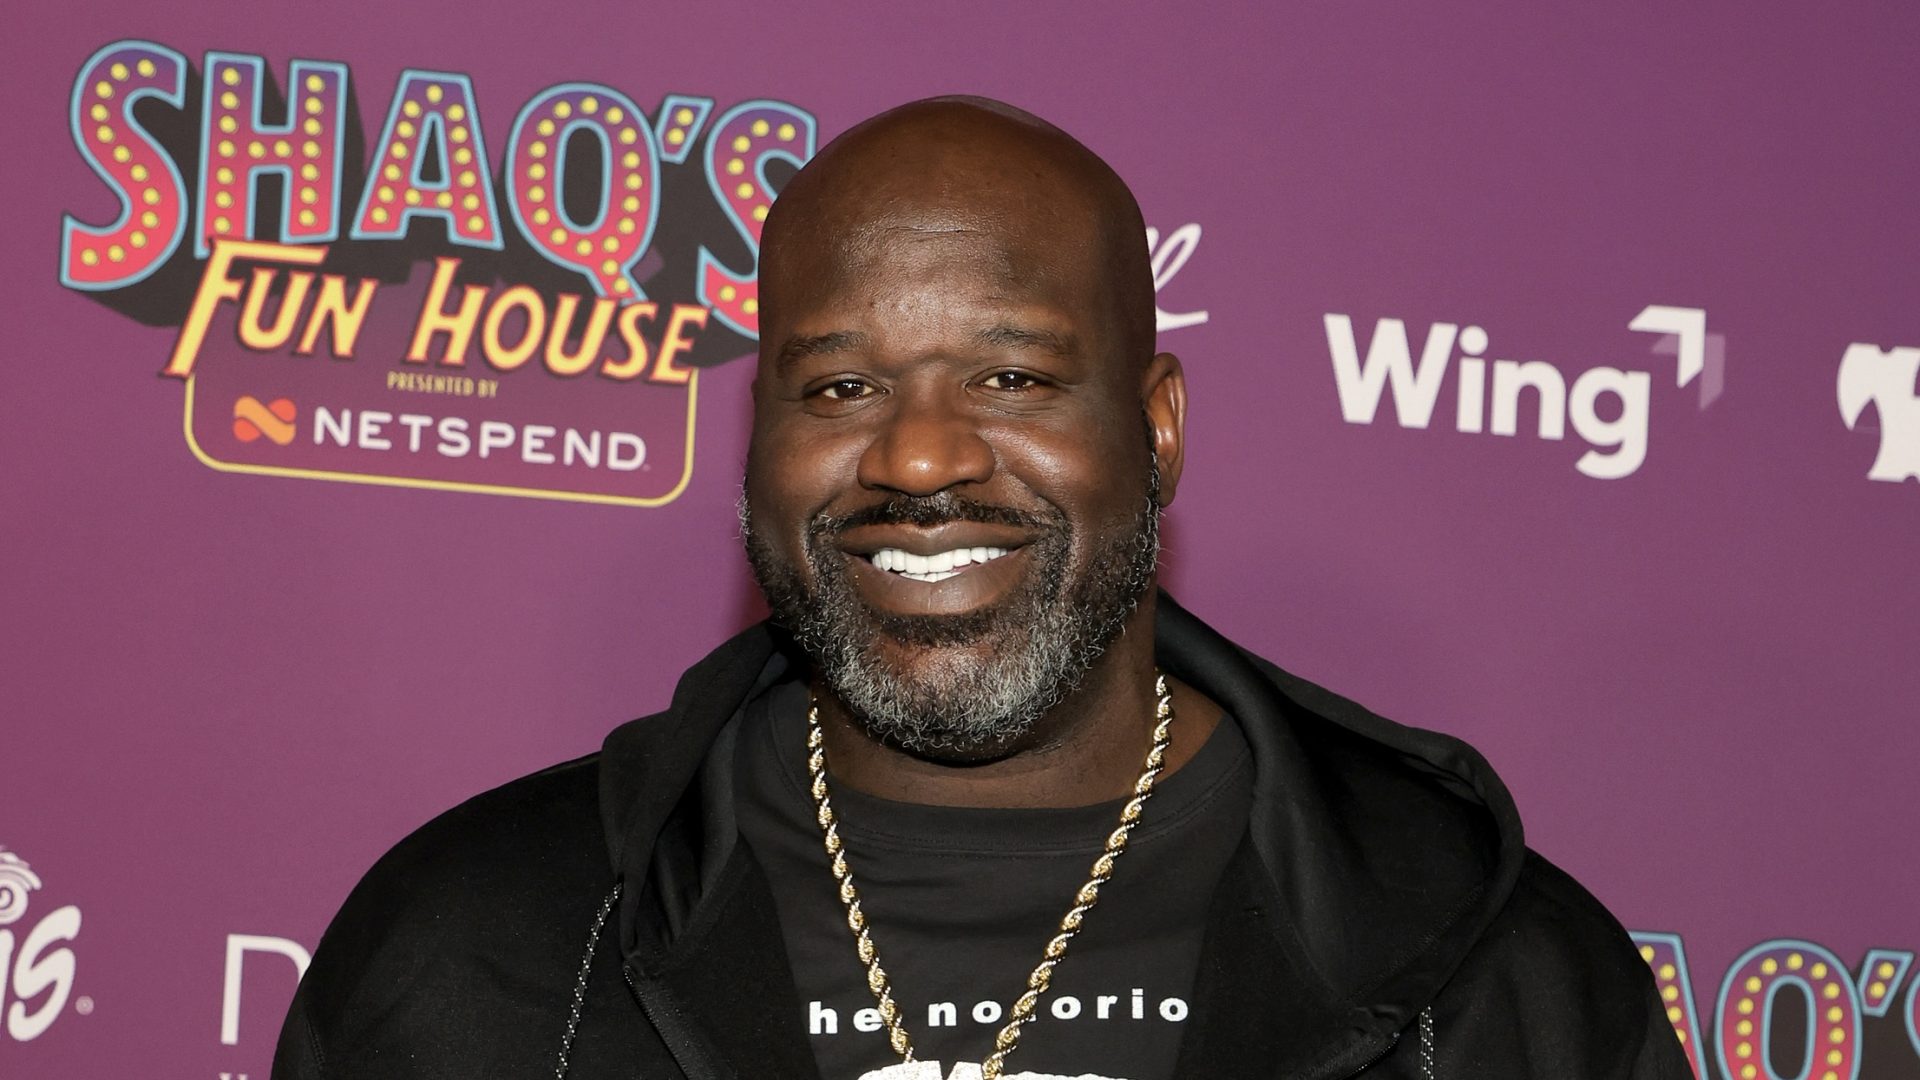 SCOTTSDALE, ARIZONA - FEBRUARY 10: Shaquille O'Neal attends Shaq's Fun House Big Game Weekend at Talking Stick Resort on February 10, 2023 in Scottsdale, Arizona.